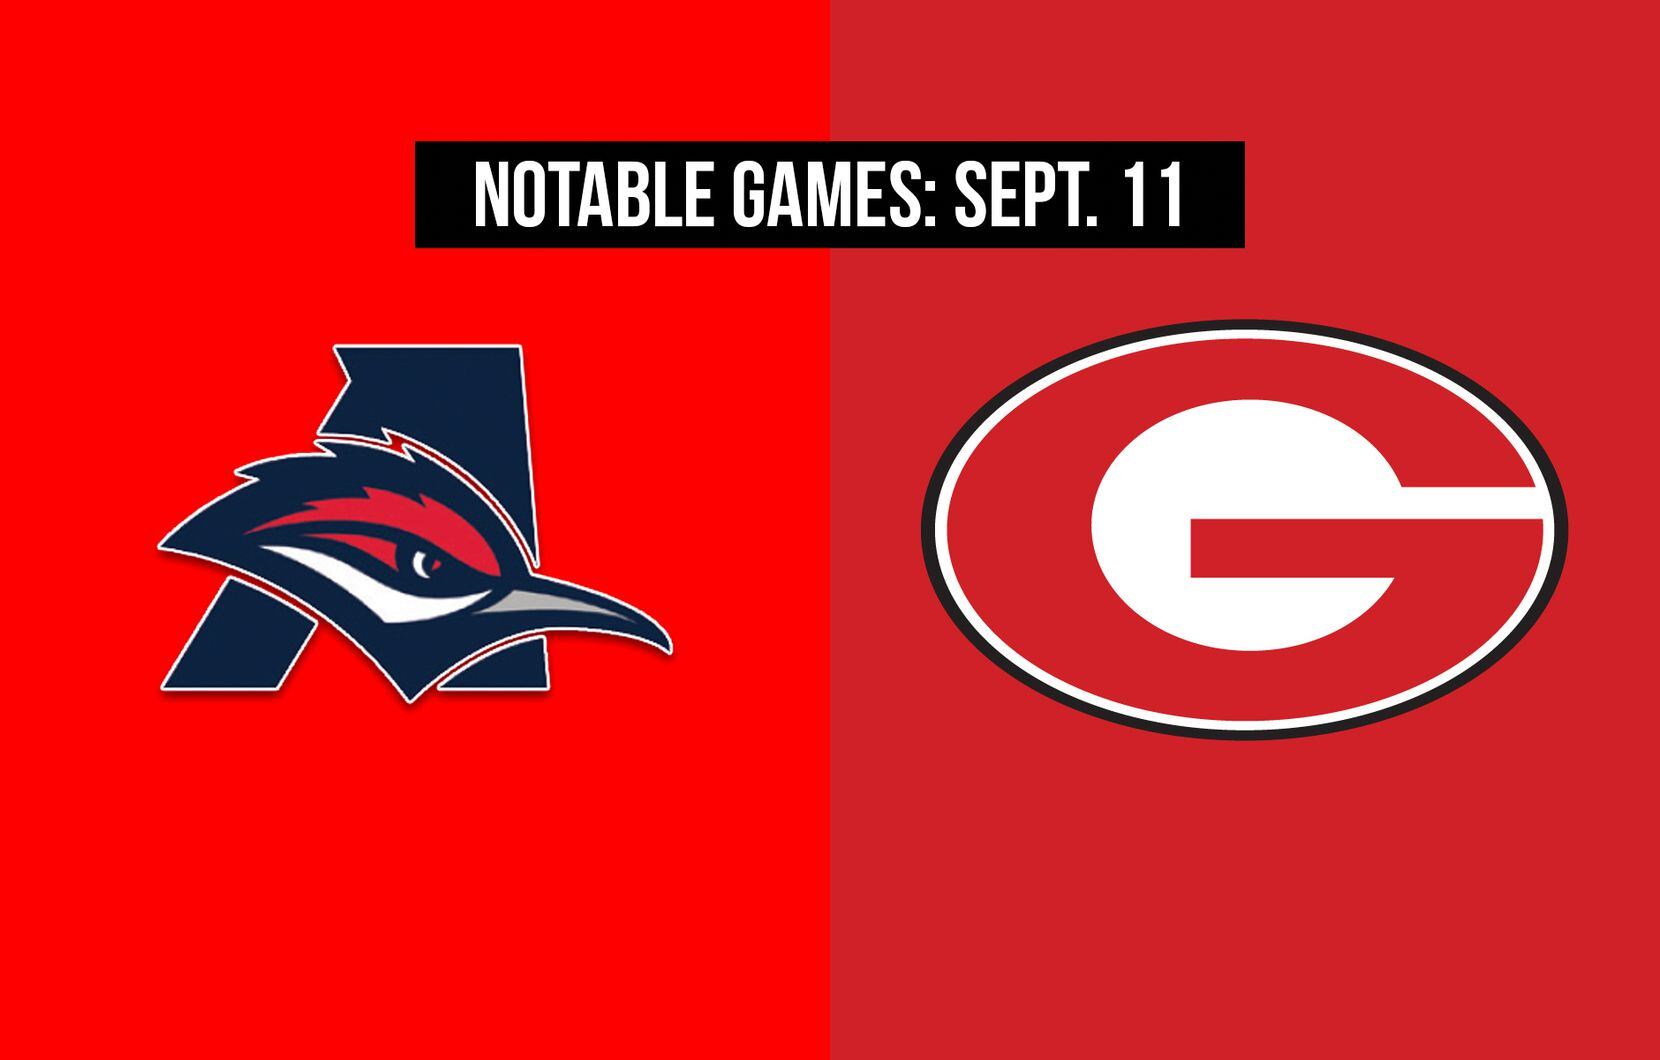 Notable games for the week of Sept. 11 of the 2020 season: Aubrey vs. Gainesville.